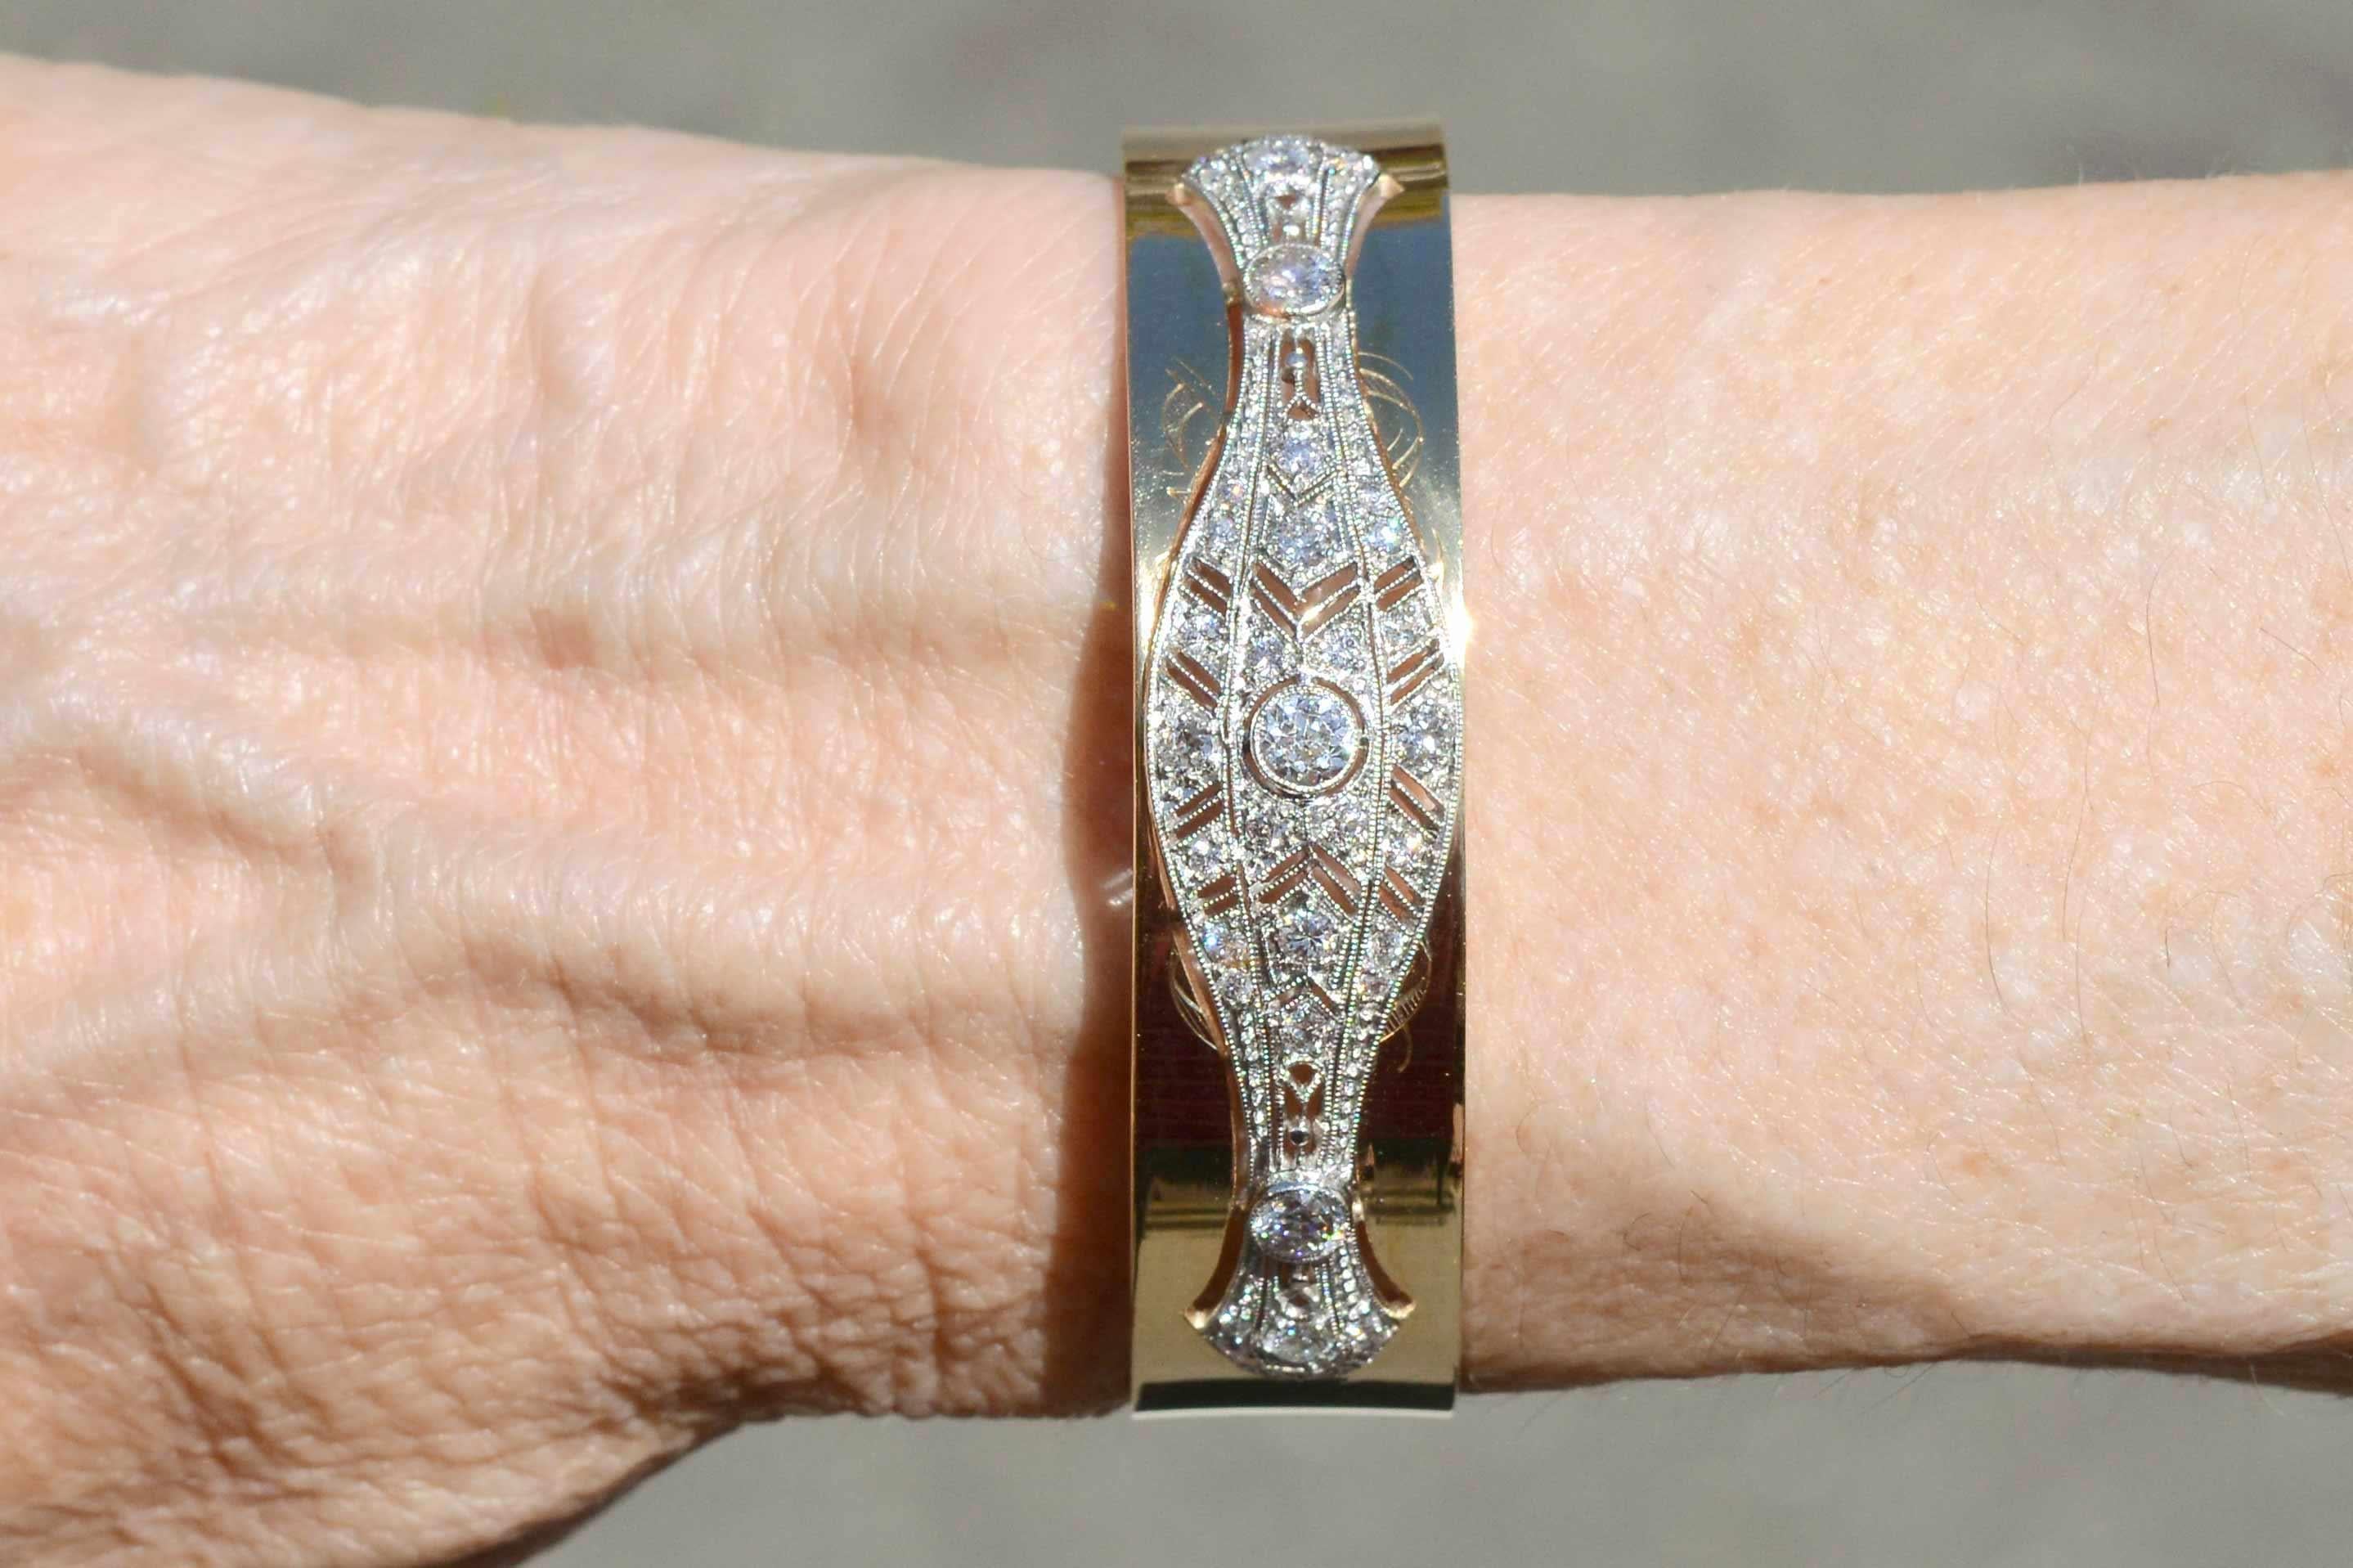 The Rochester Art Deco diamond bangle bracelet is a wide cuff featuring exquisite antique filigree work. The 2 tone 14kt yellow gold frames a a platinum brooch with nearly 1 carat of sparkling old European diamonds arranged in a geometric chevron